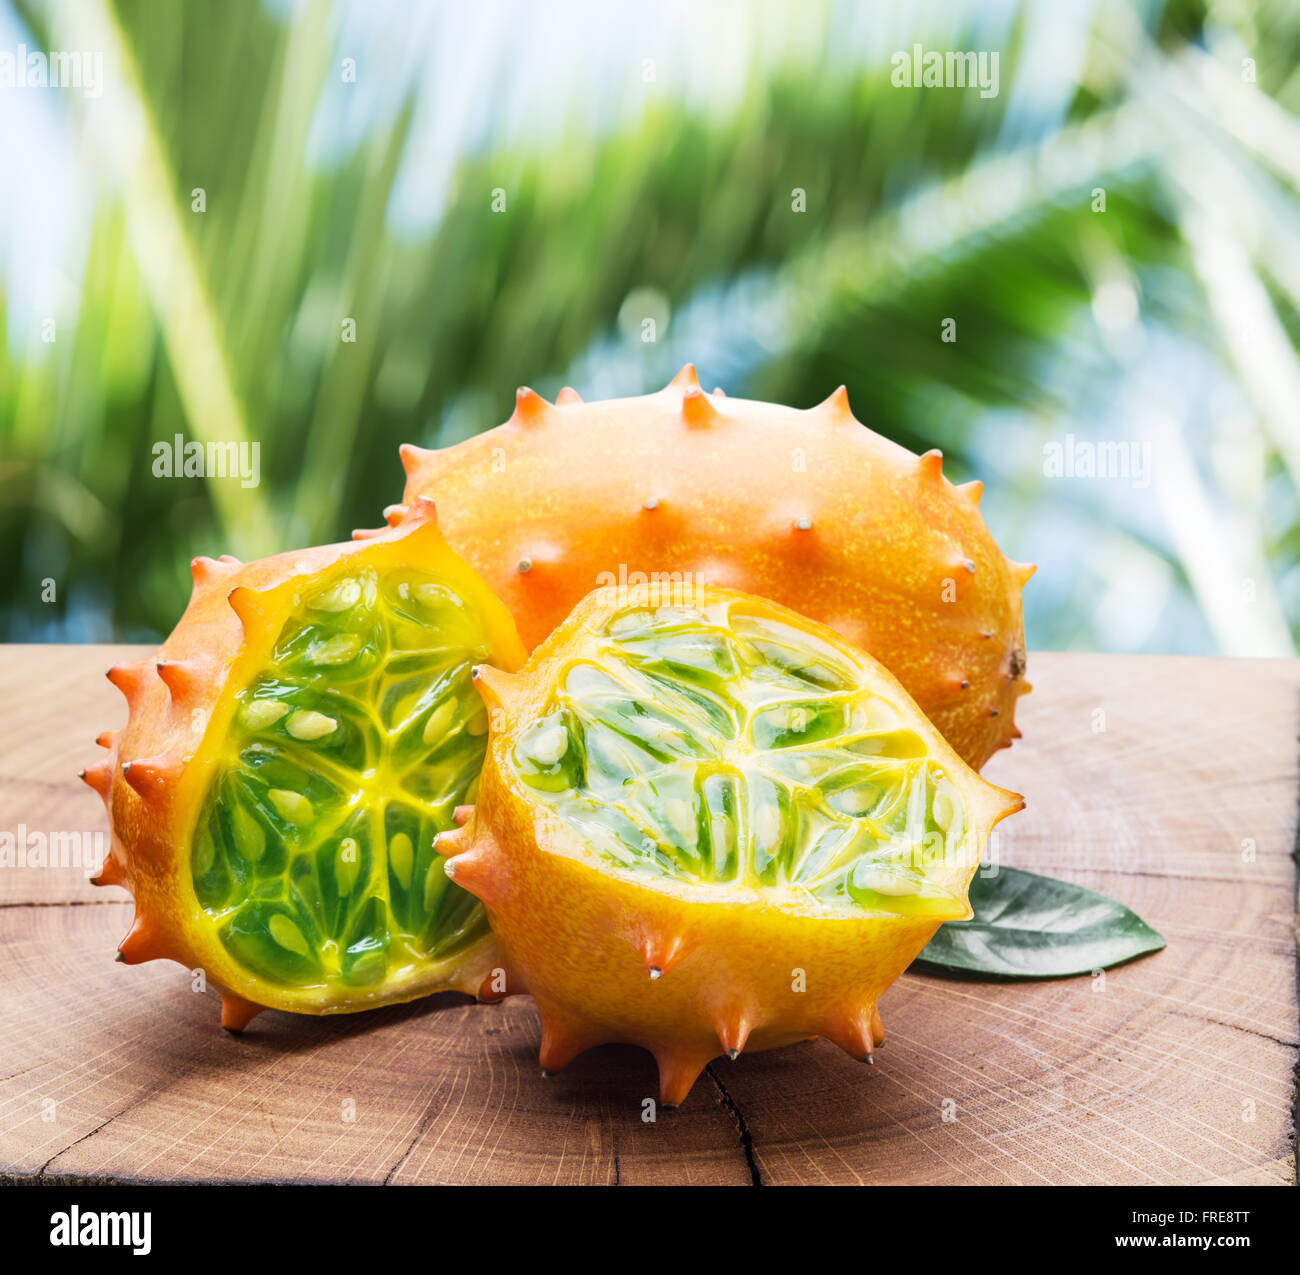 Kiwano fruits on the wooden table with green nature on the background. Stock Photo